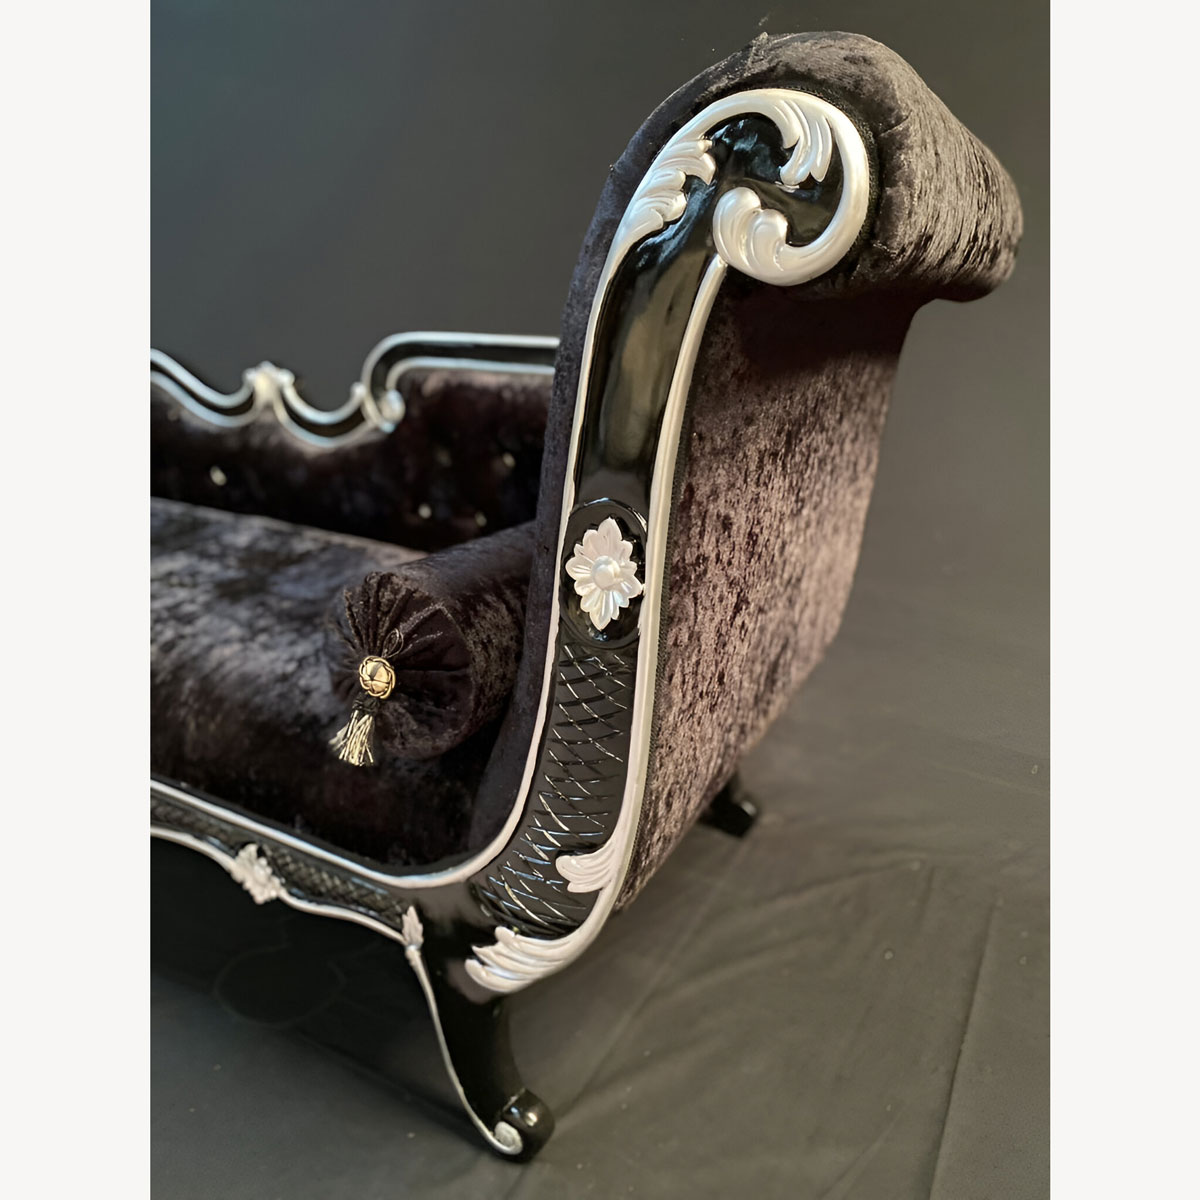 Armani Chaise Longue In Black With Silver Detailing And Blackberry Crushed Velvet Crystal Buttons Smaller Version 5 - Hampshire Barn Interiors - Armani Chaise Longue In Black With Silver Detailing And Blackberry Crushed Velvet Crystal Buttons Smaller Version -